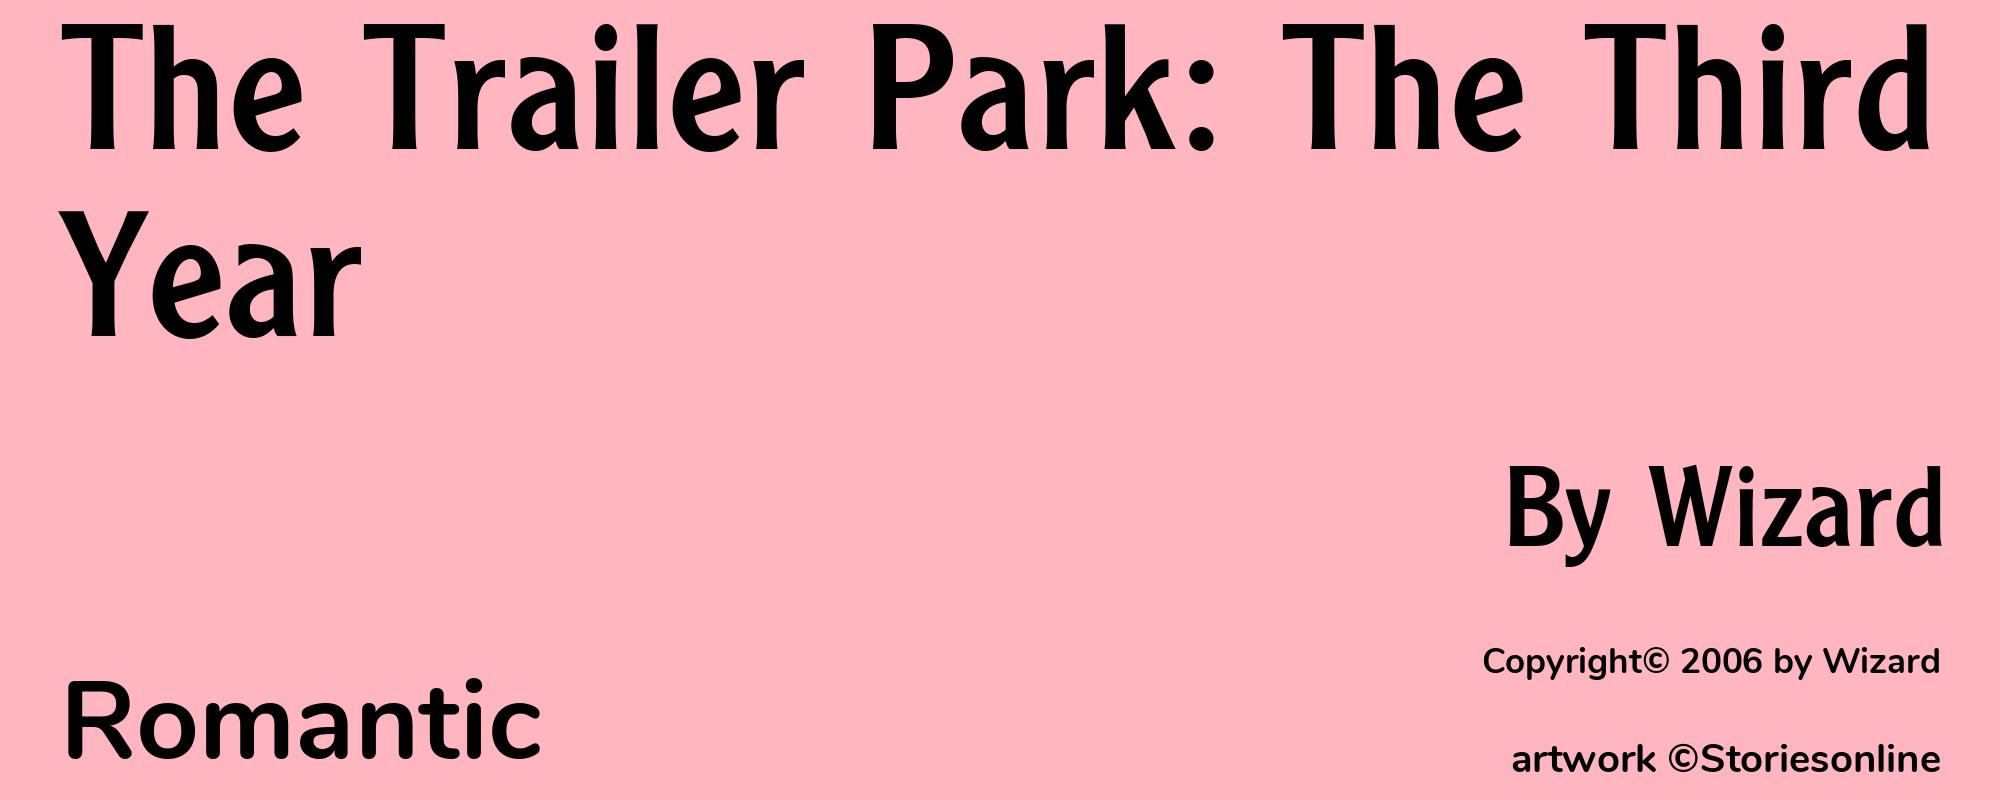 The Trailer Park: The Third Year - Cover